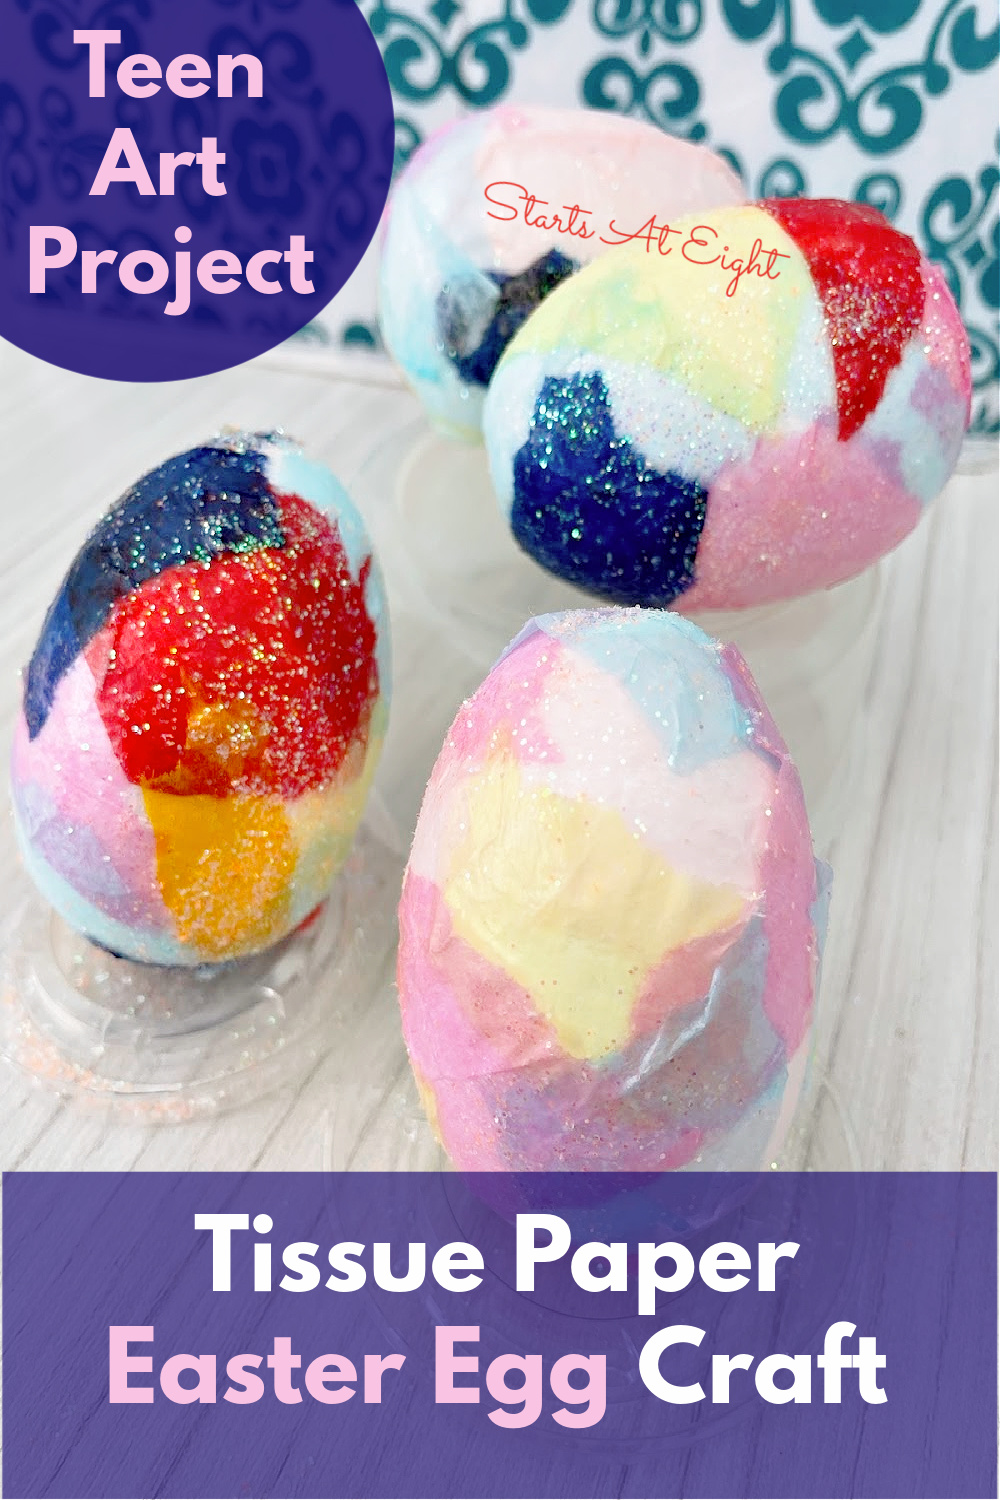 This Tissue Paper Easter Egg Craft is a perfect activity for teens. With just a few supplies you can make decorative and glittery eggs!